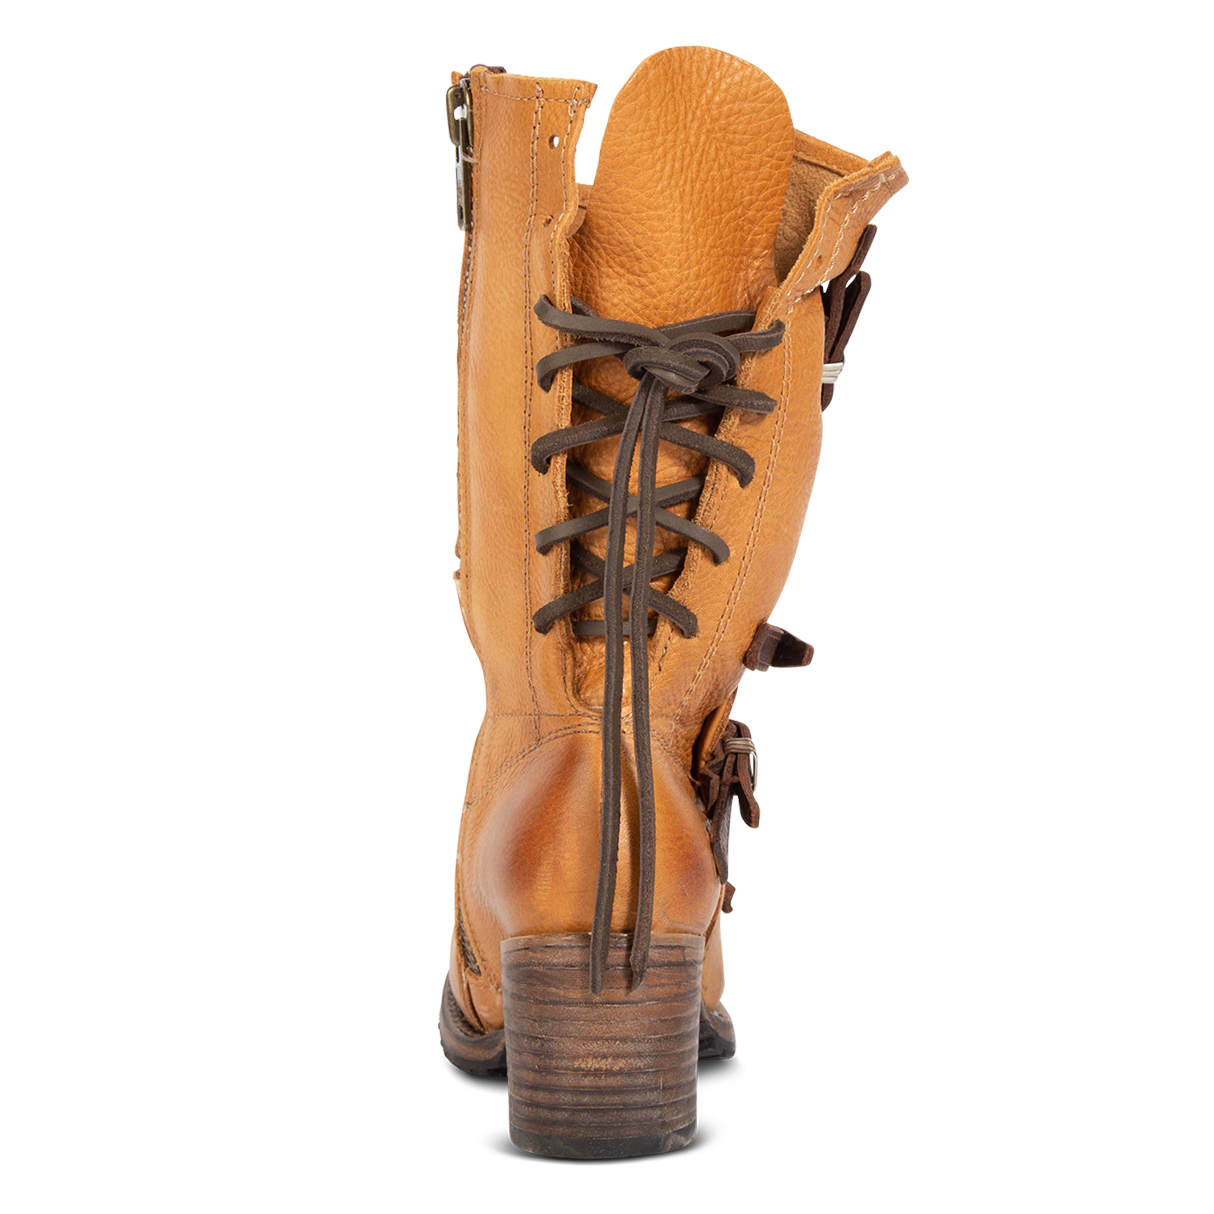 Back view showing adjustable leather lacing on FREEBIRD women's Cora tan leather boot